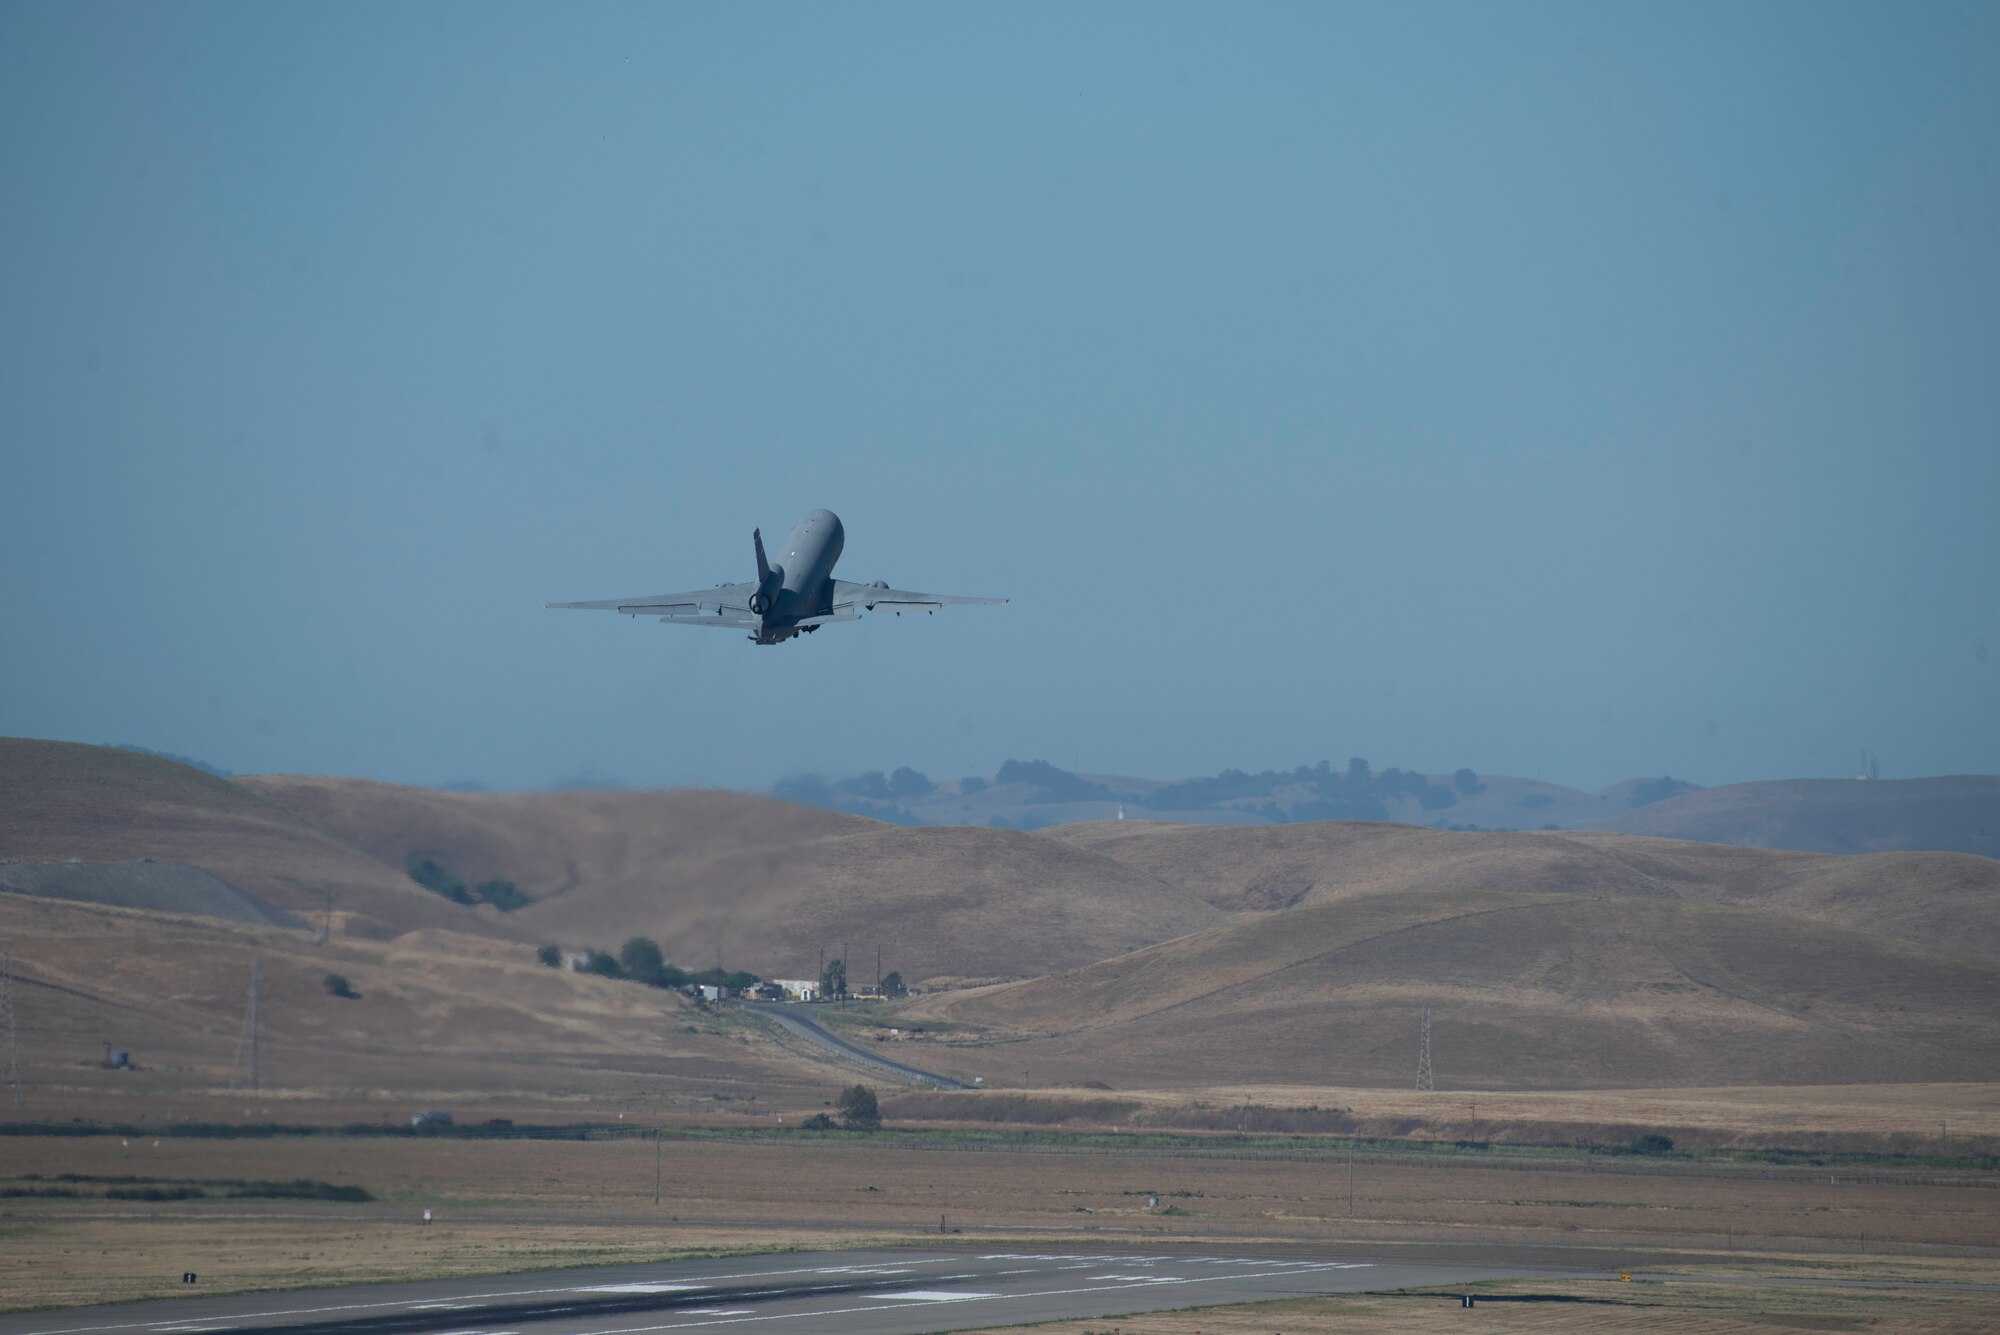 A KC-10 Extender takes off from the runway at Travis Air Force Base, California, May 27, 2020. The KC-10 is a refueling aircraft capable of carrying 356,000 pounds of fuel and transporting 170,000 pounds of cargo. (U.S. Air Force photo by Tech. Sgt. James Hodgman)